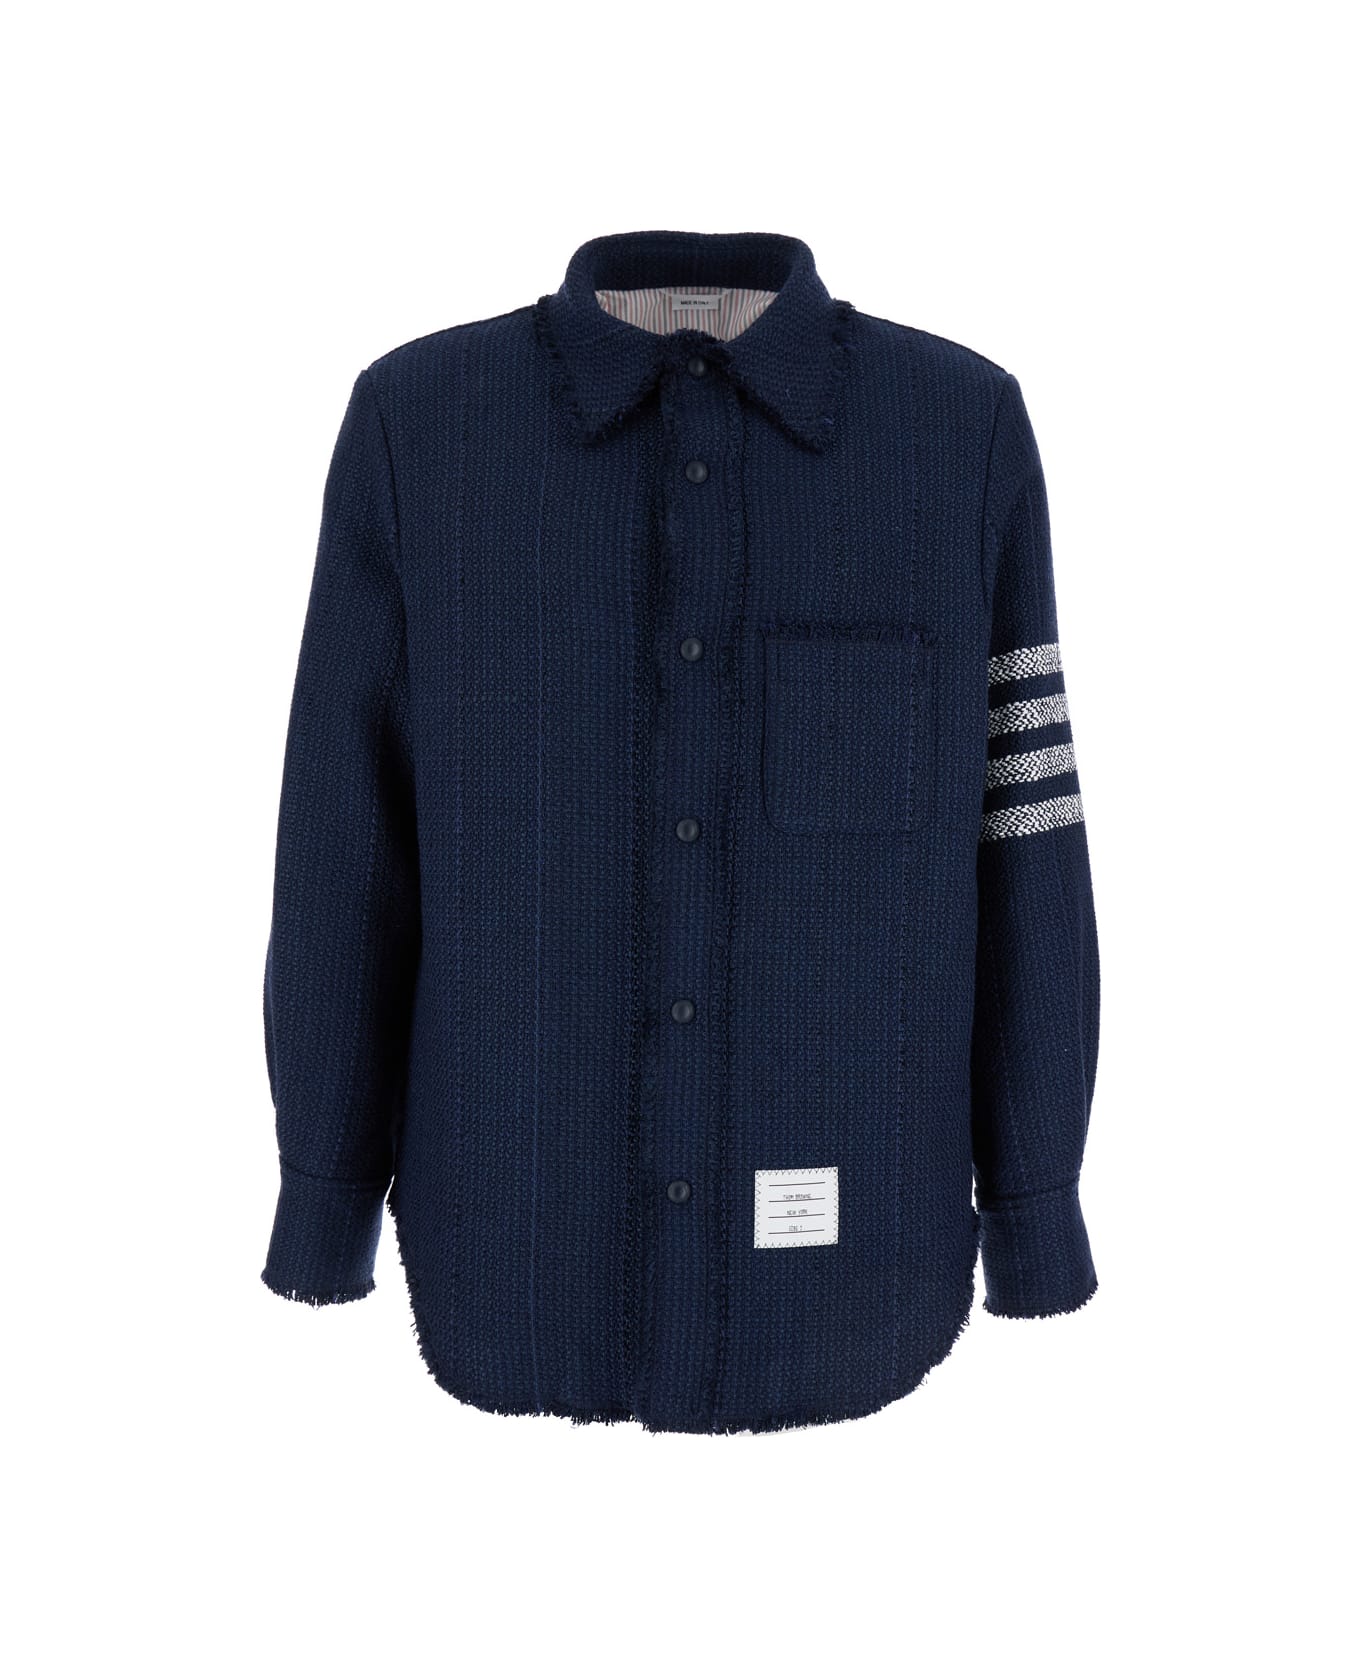 Thom Browne Snap Front Shirt Jacket W/fray Edge In Woven 4 Bar Solid Cotton Tweed - Blu シャツ